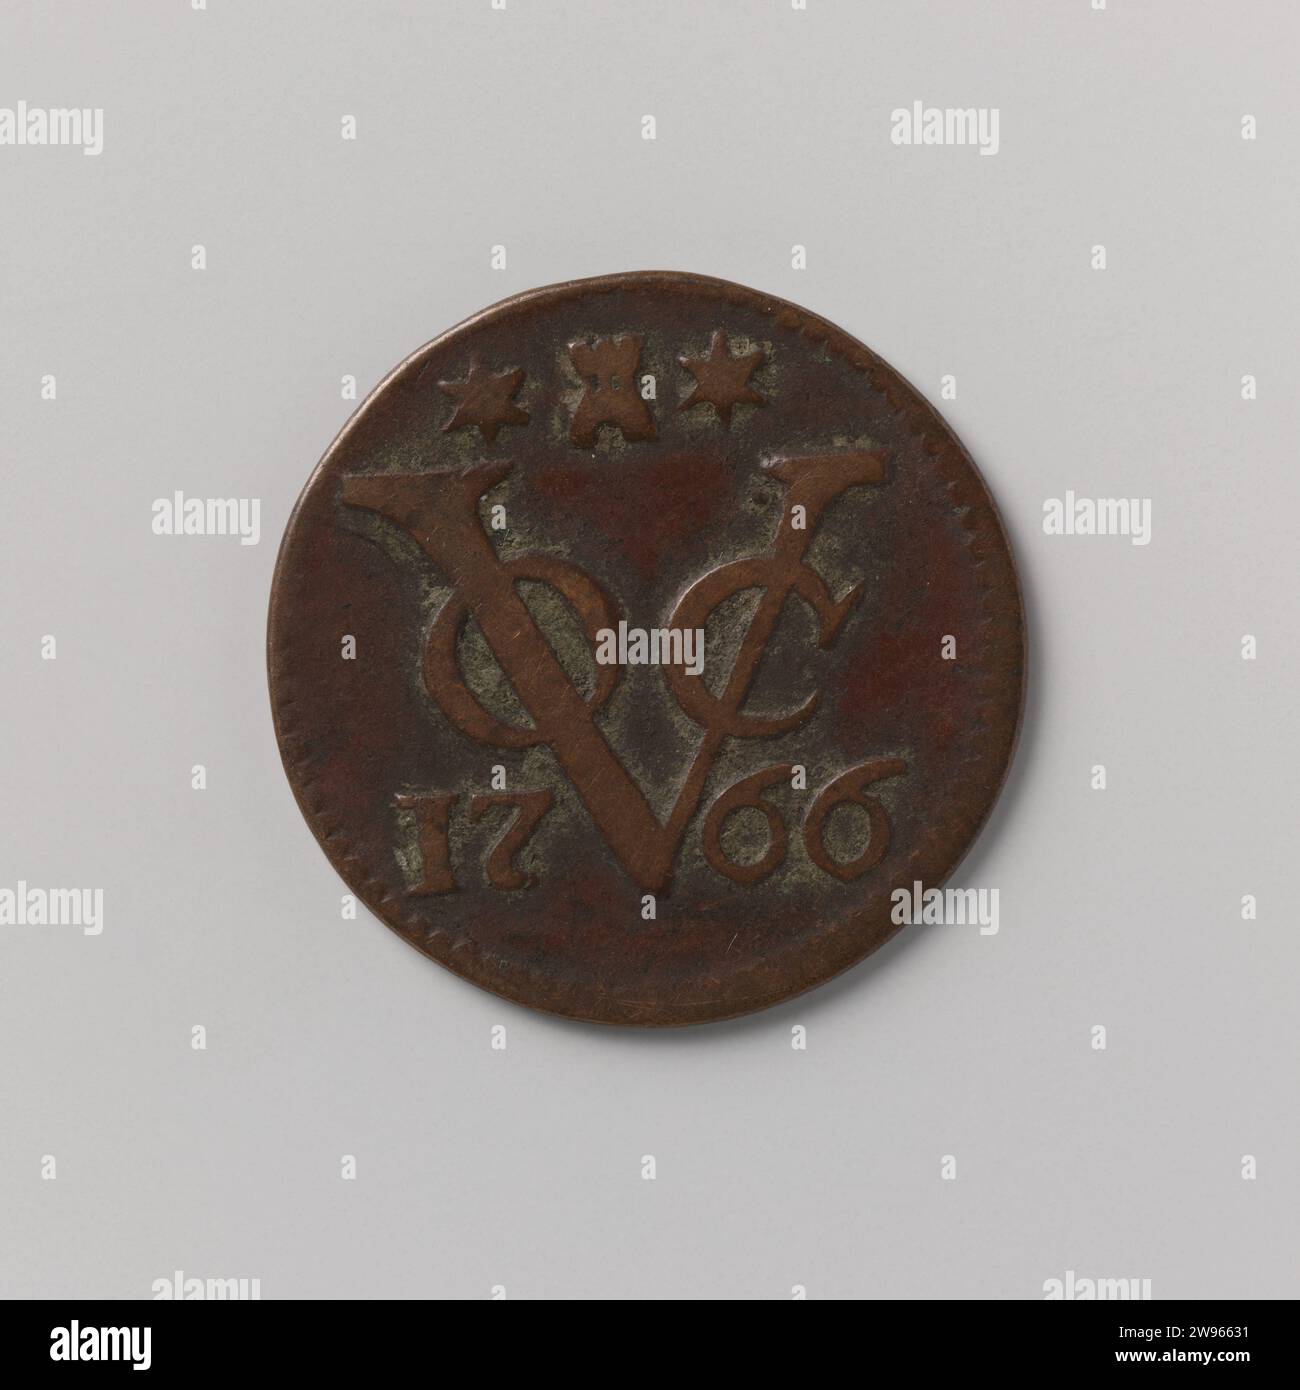 Dang of the VOC from Zeeland, 1766, United Oostindische Compagnie, 1766 coin Copper mint. Front: crowned coat of arms of Zeeland. Reverse: monogram of the VOC, above which mint sign and including the year. Smooth edge. Middelburg copper (metal) striking (metalworking) Stock Photo